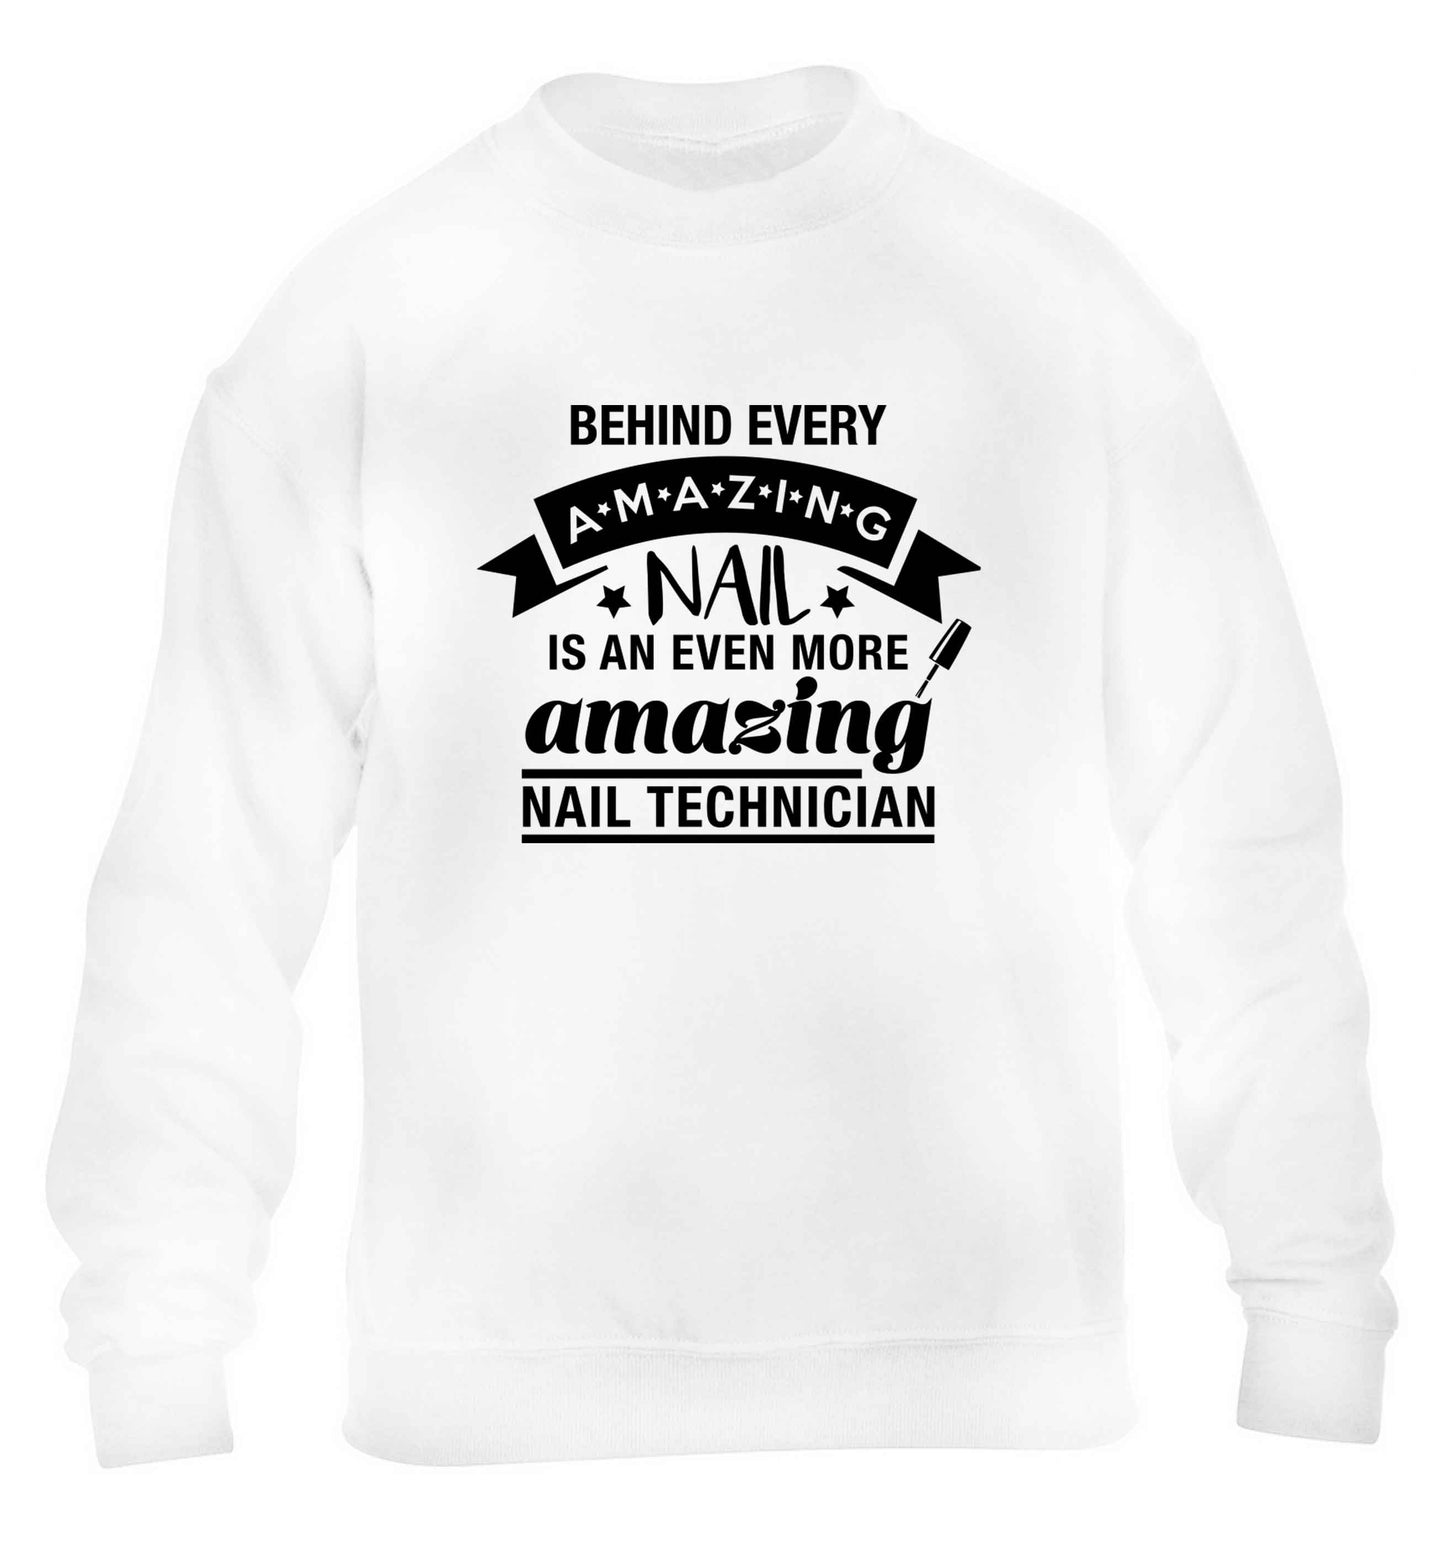 Behind every amazing nail is an even more amazing nail technician children's white sweater 12-13 Years